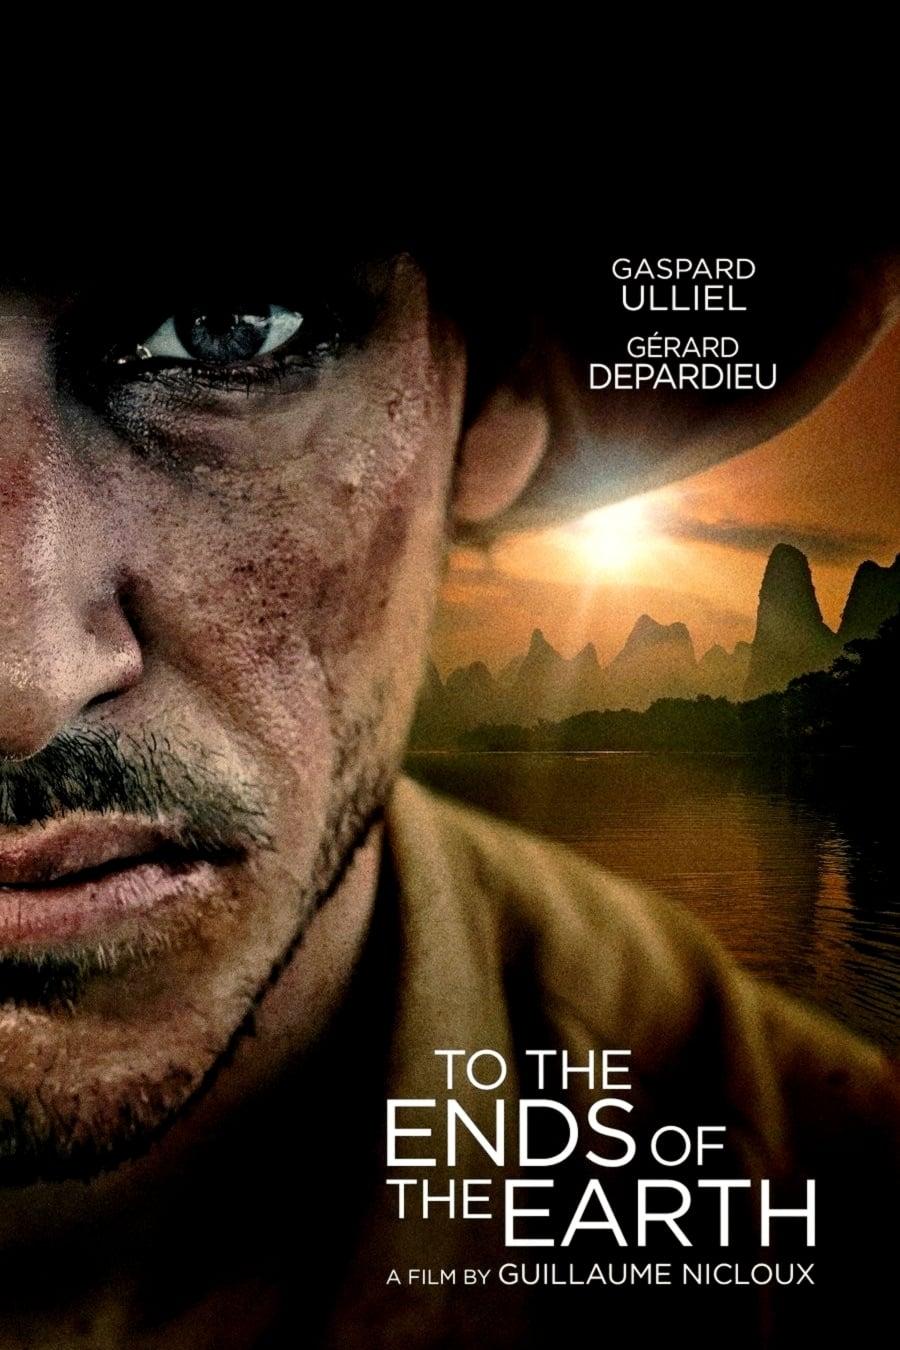 To the Ends of the World poster